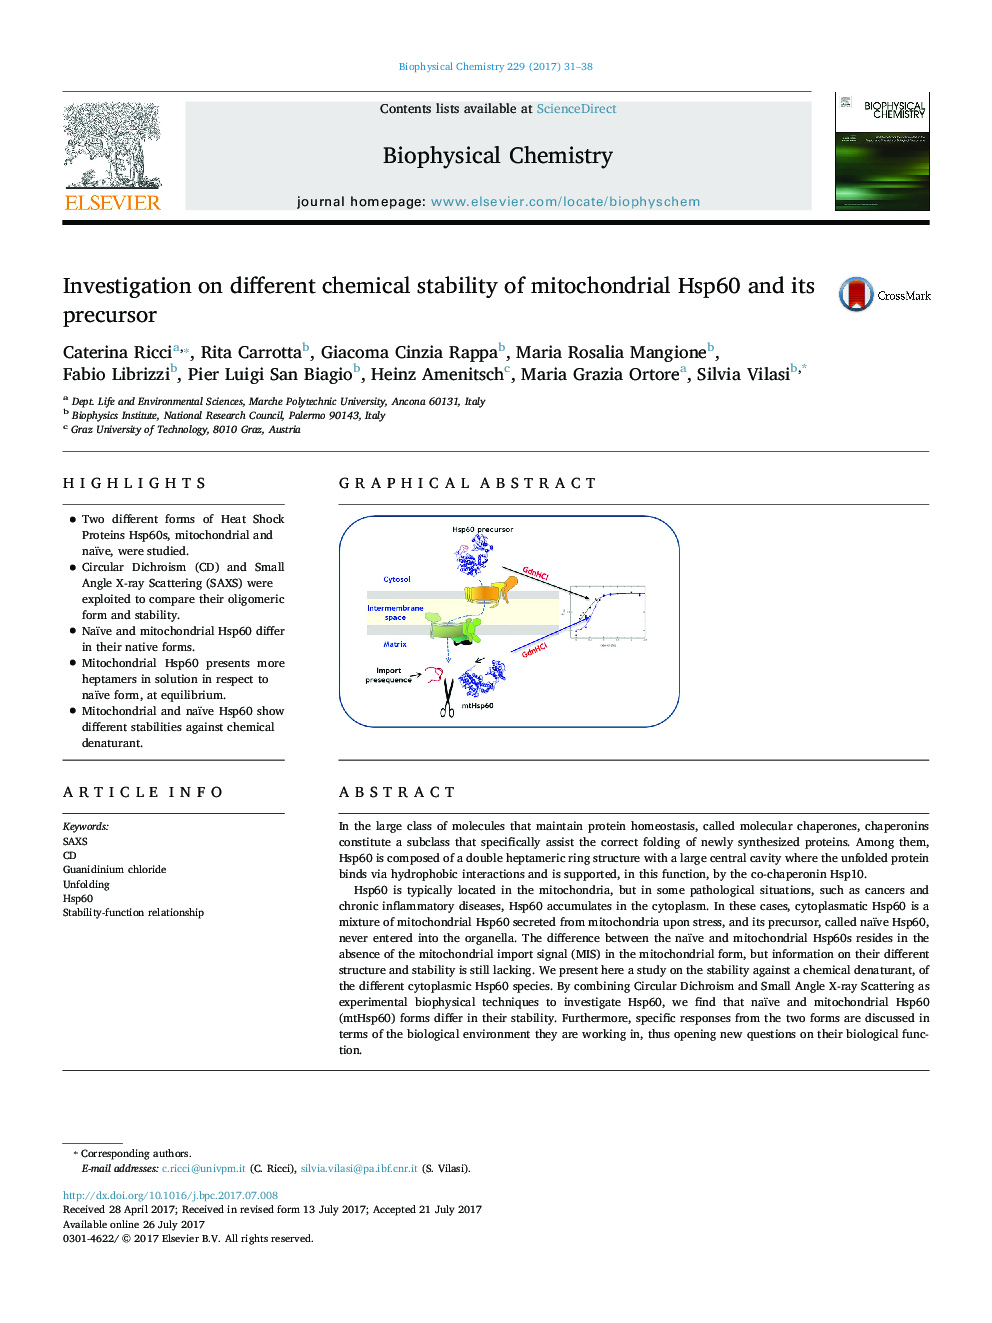 Investigation on different chemical stability of mitochondrial Hsp60 and its precursor